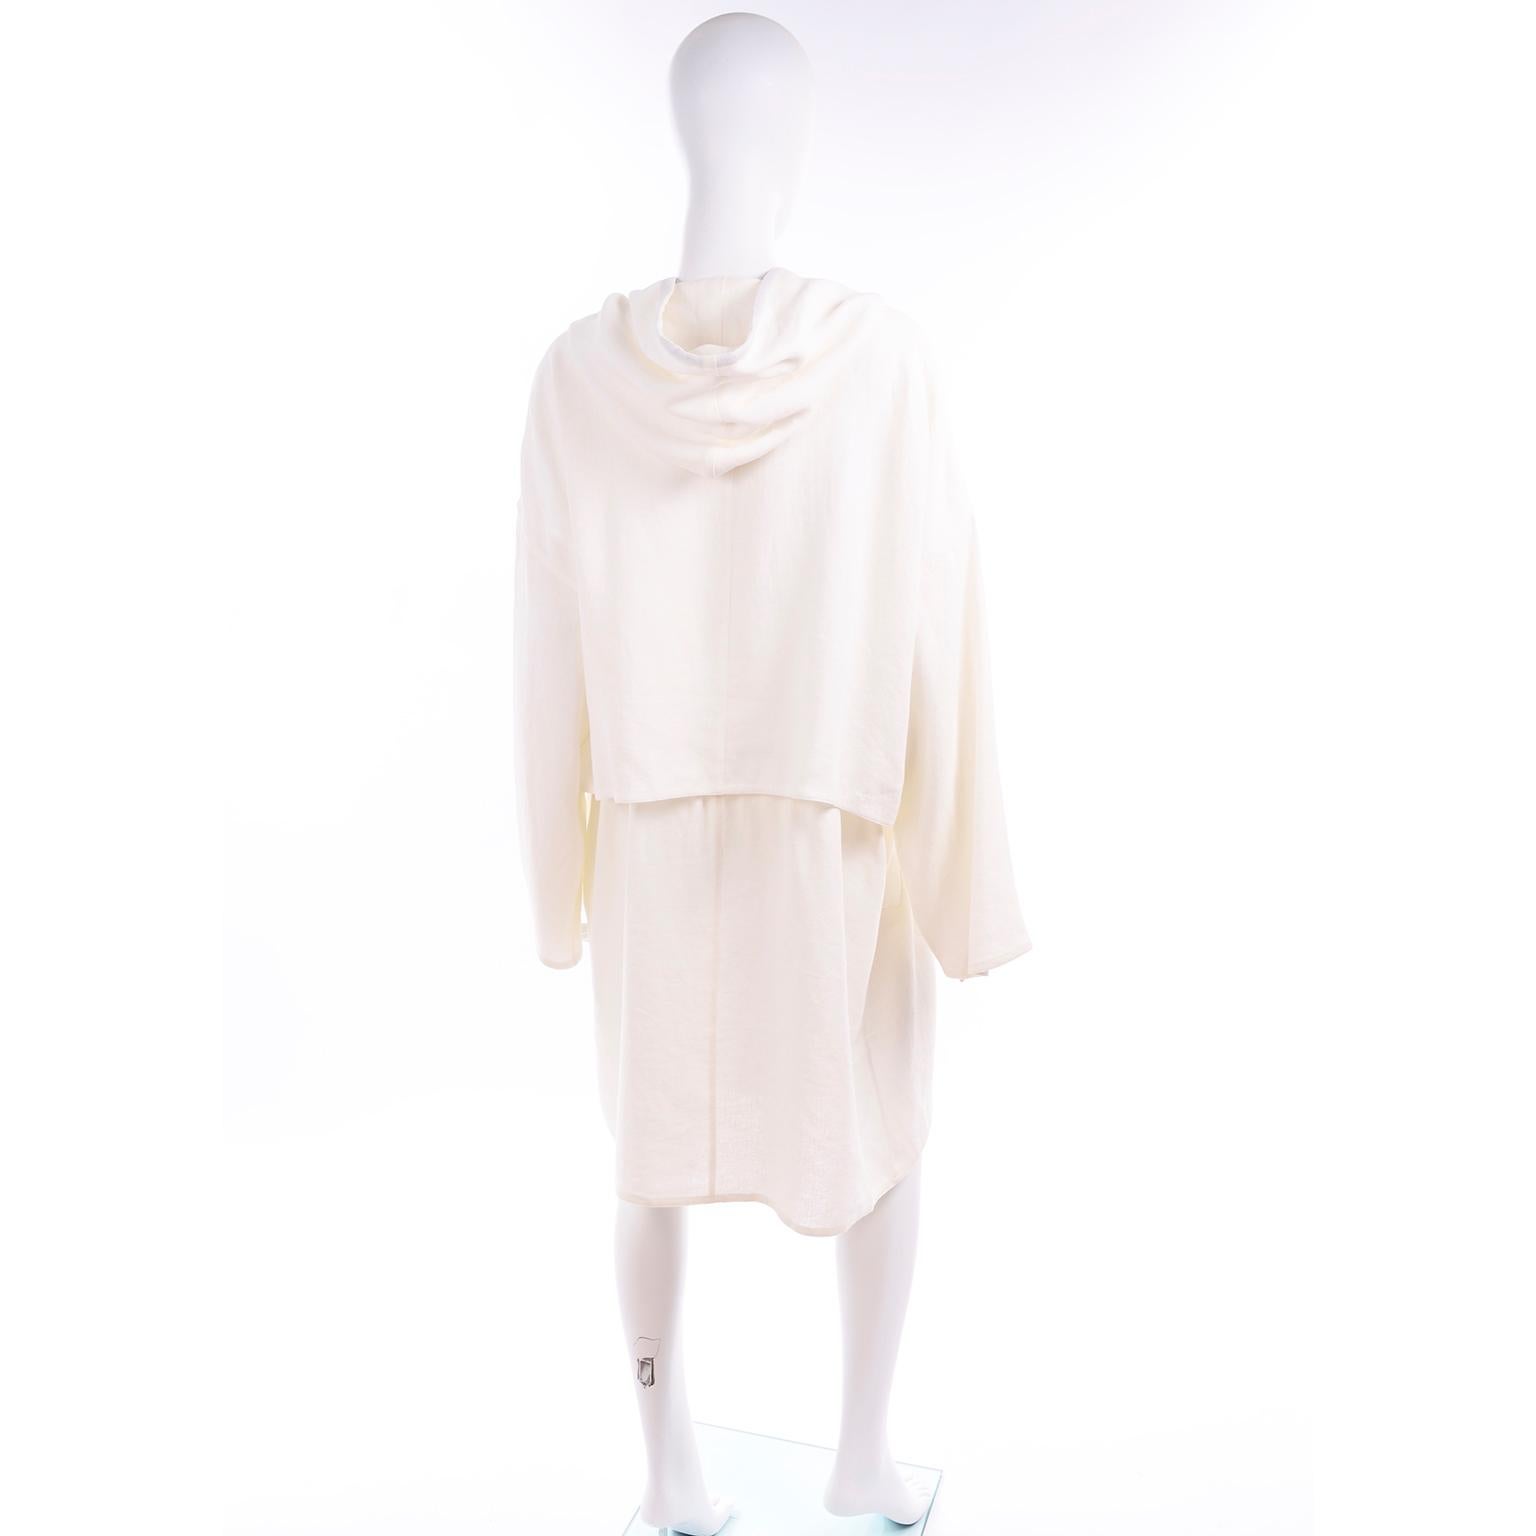 Women's Deadstock New White Linen Dusan Coat Drawstring Jacket with Hood New With Tags